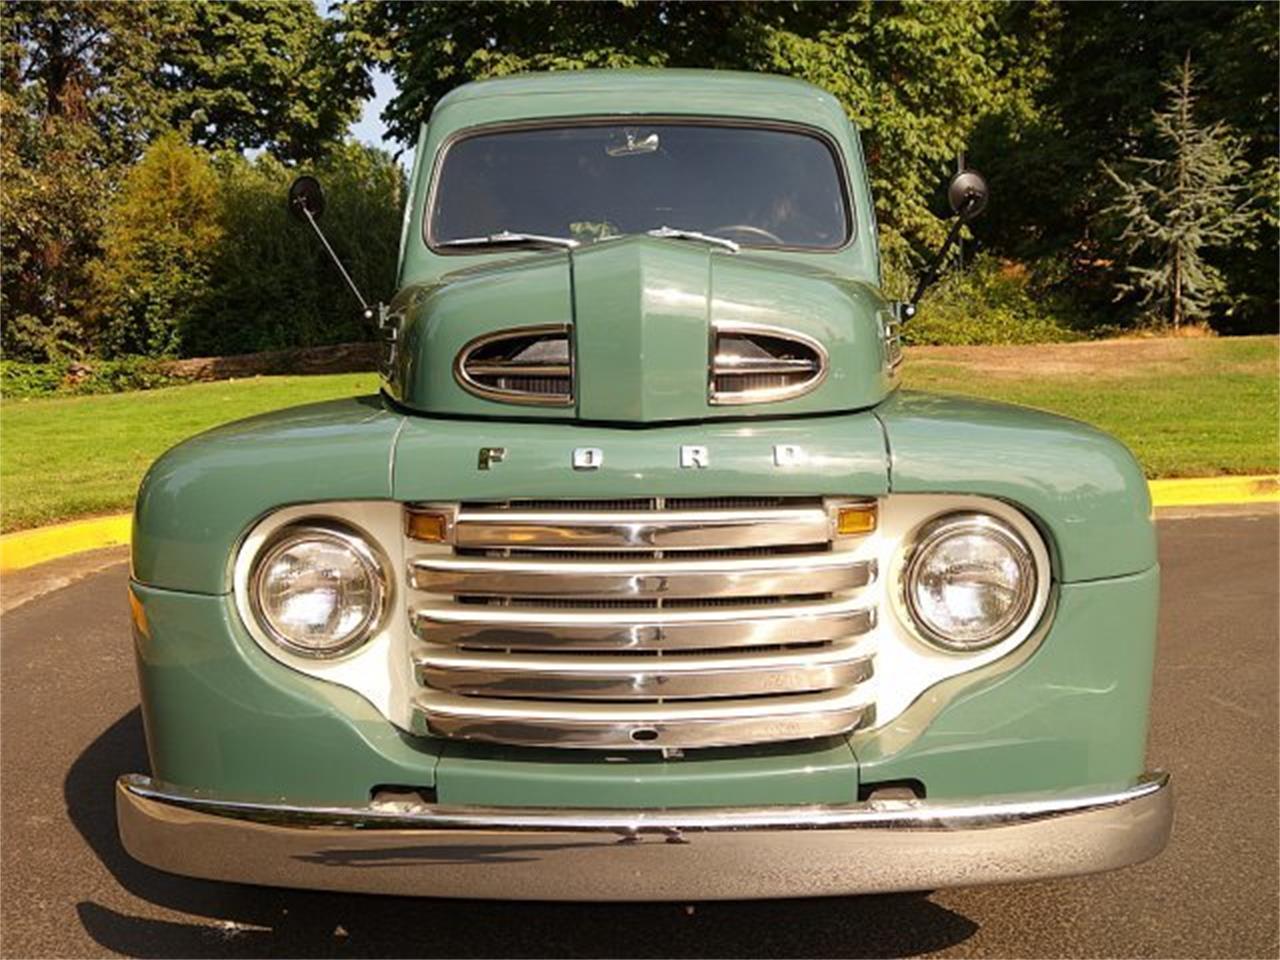 1950 Ford Panel Truck for Sale | ClassicCars.com | CC-1109433